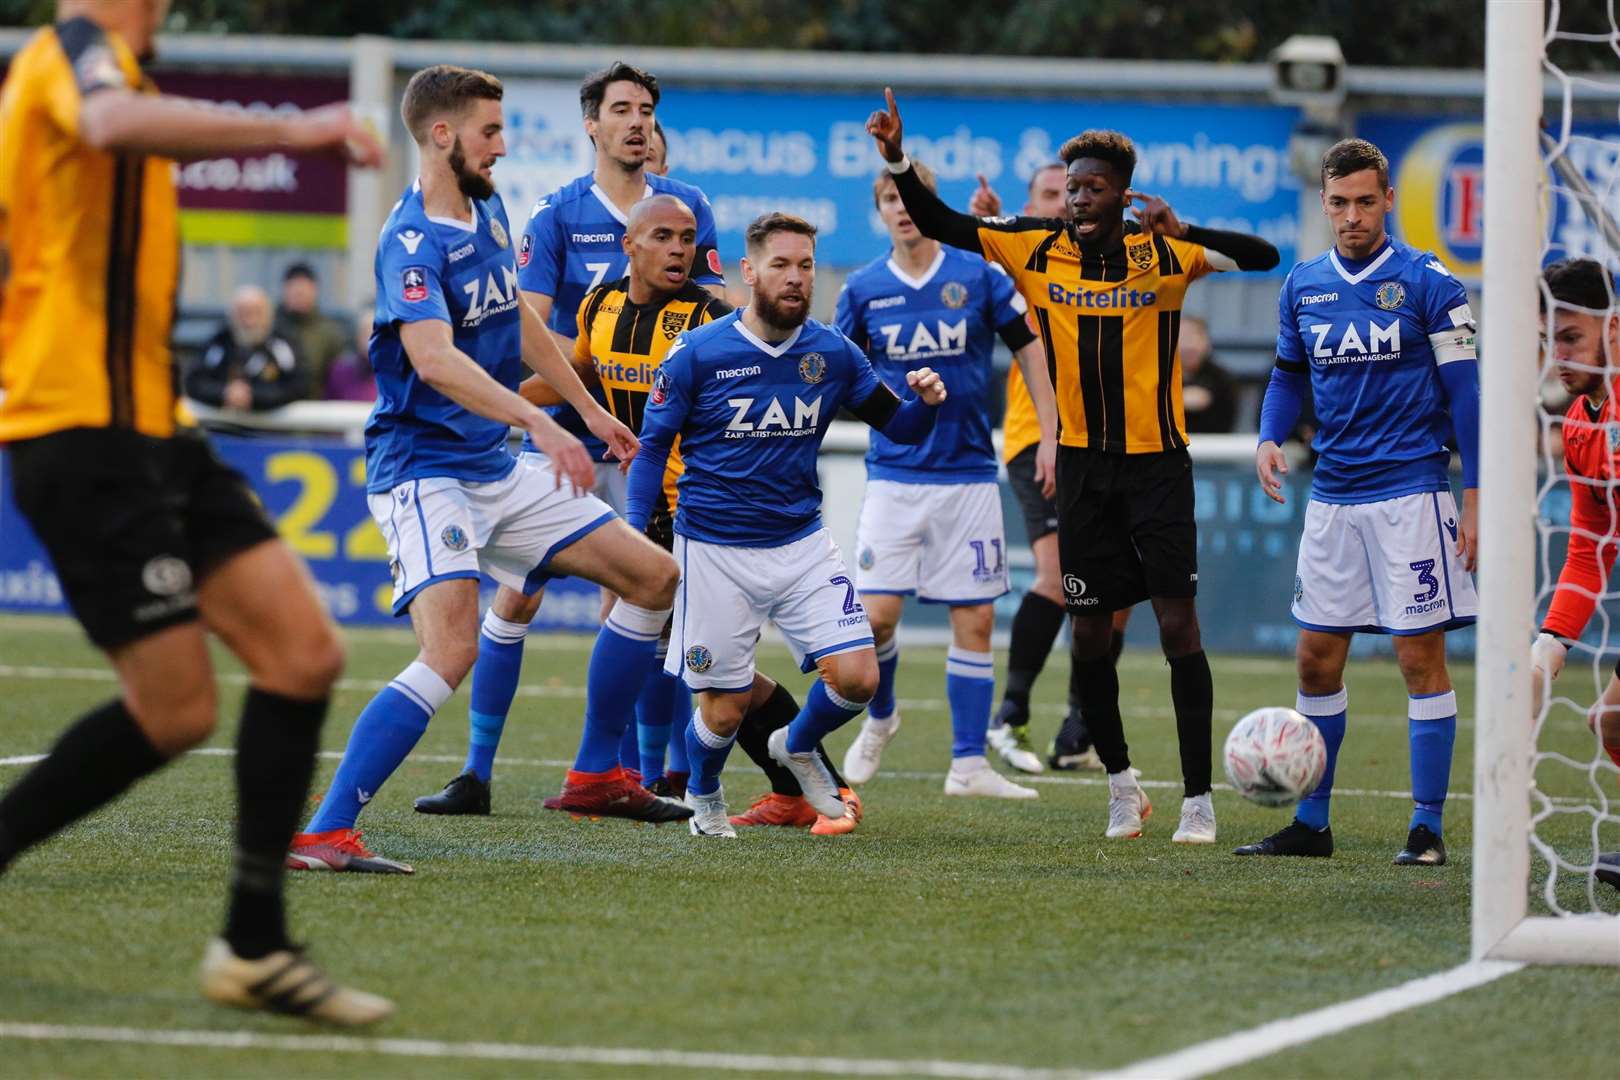 Maidstone players appeal after Elliott Romain's header goes in and comes back out Picture: Matthew Walker